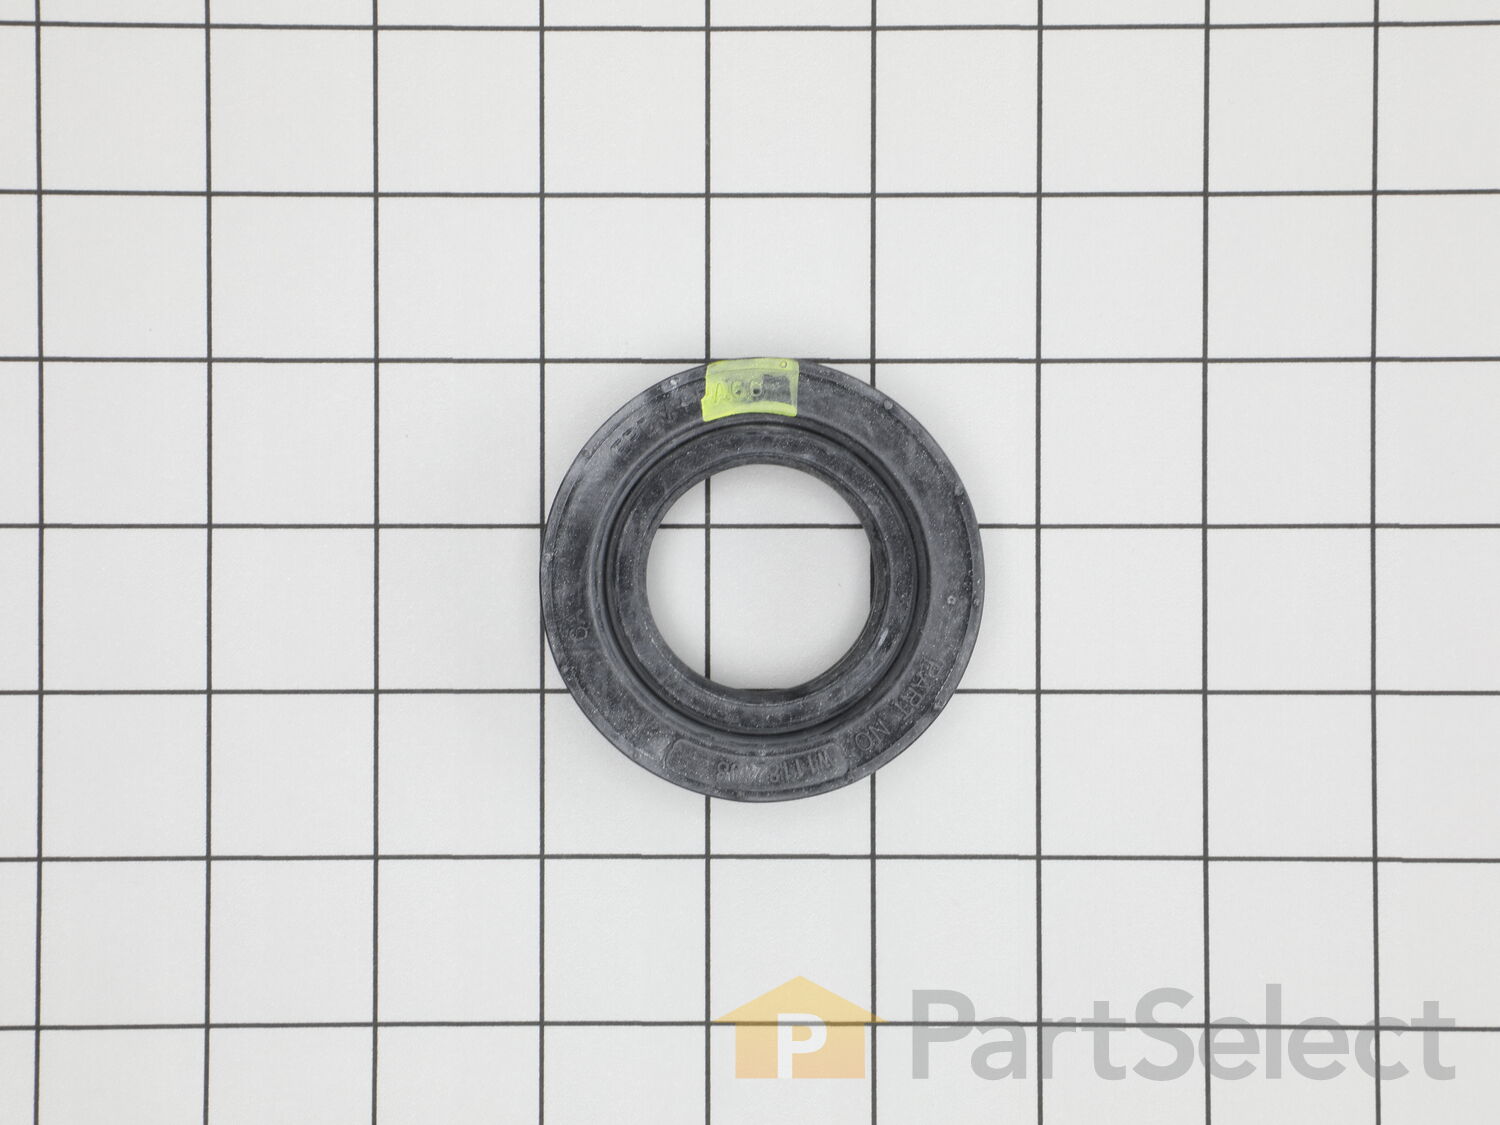 Grommet WPW10538166  Official Whirlpool Part  Fast Shipping  PartSelect